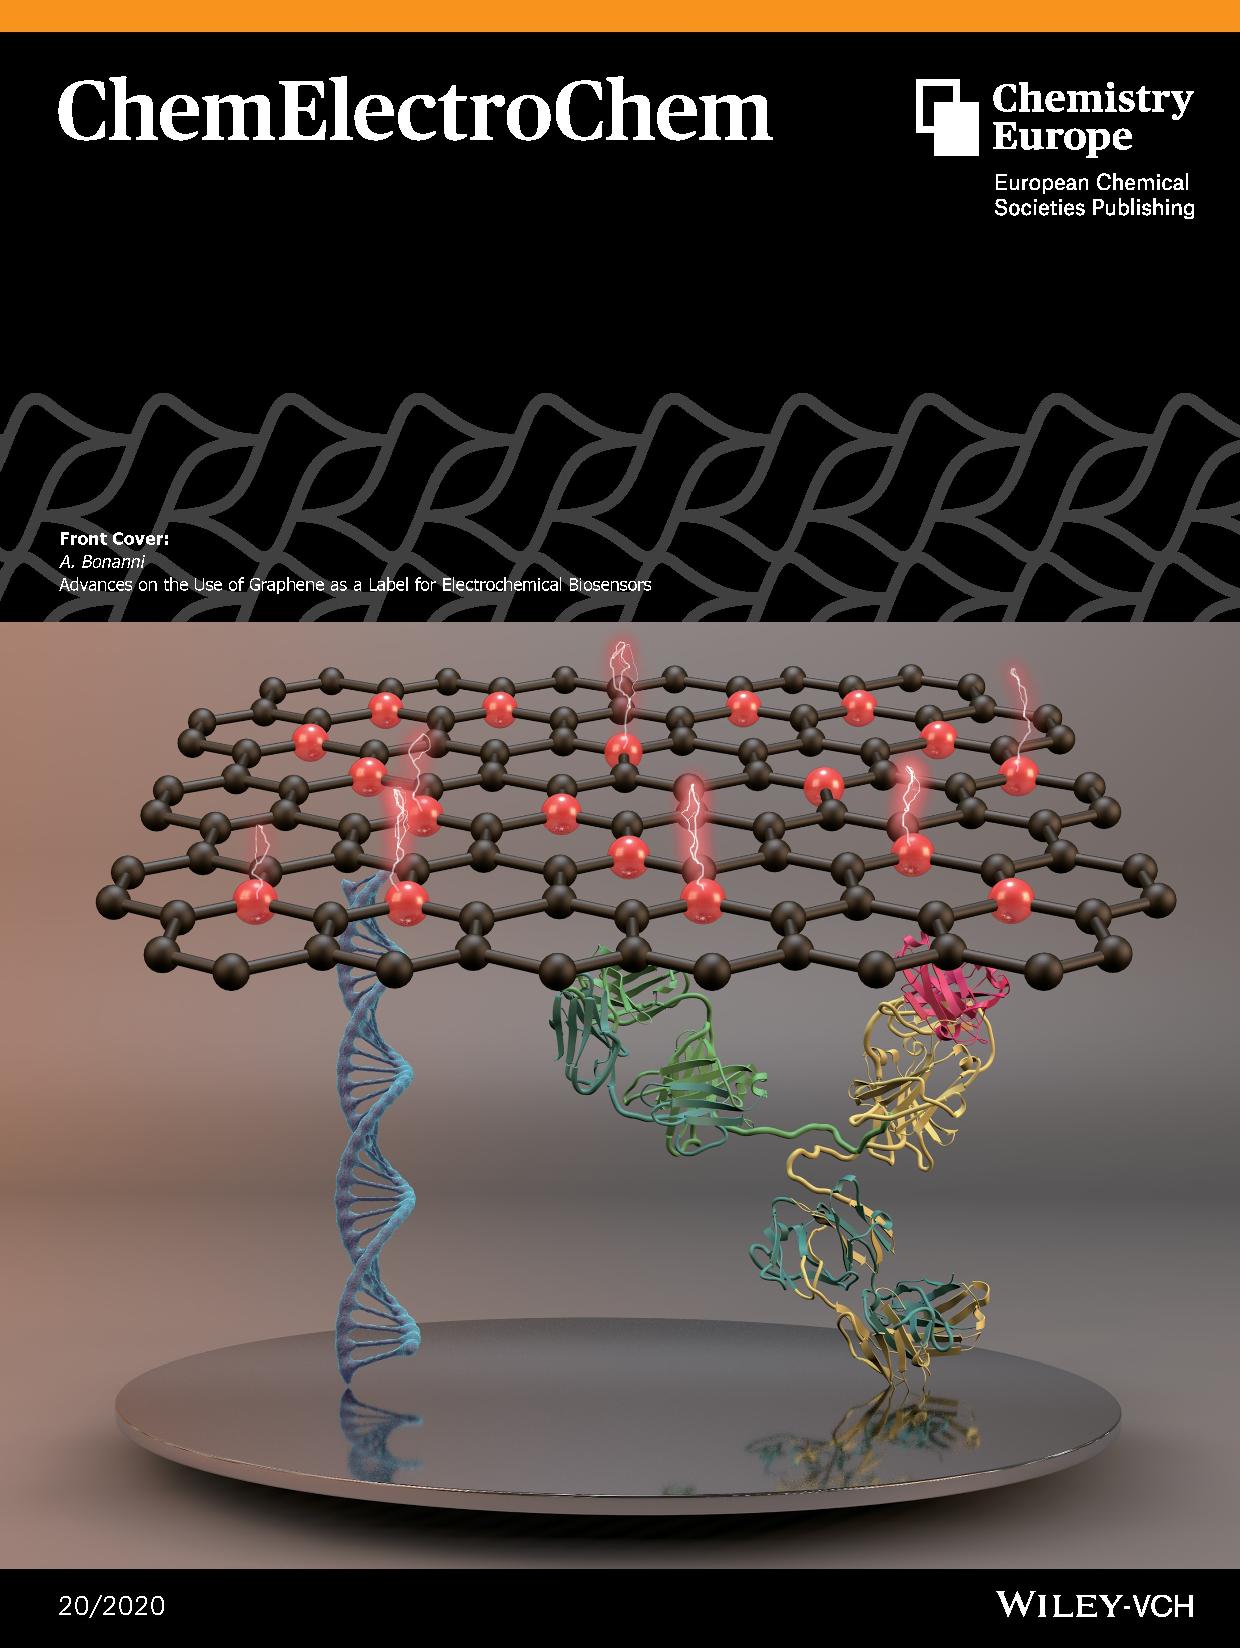 LetPub Journal Cover Art Design - Advances on the Use of Graphene as a Label for Electrochemical Biosensors (ChemElectroChem 20/2020)